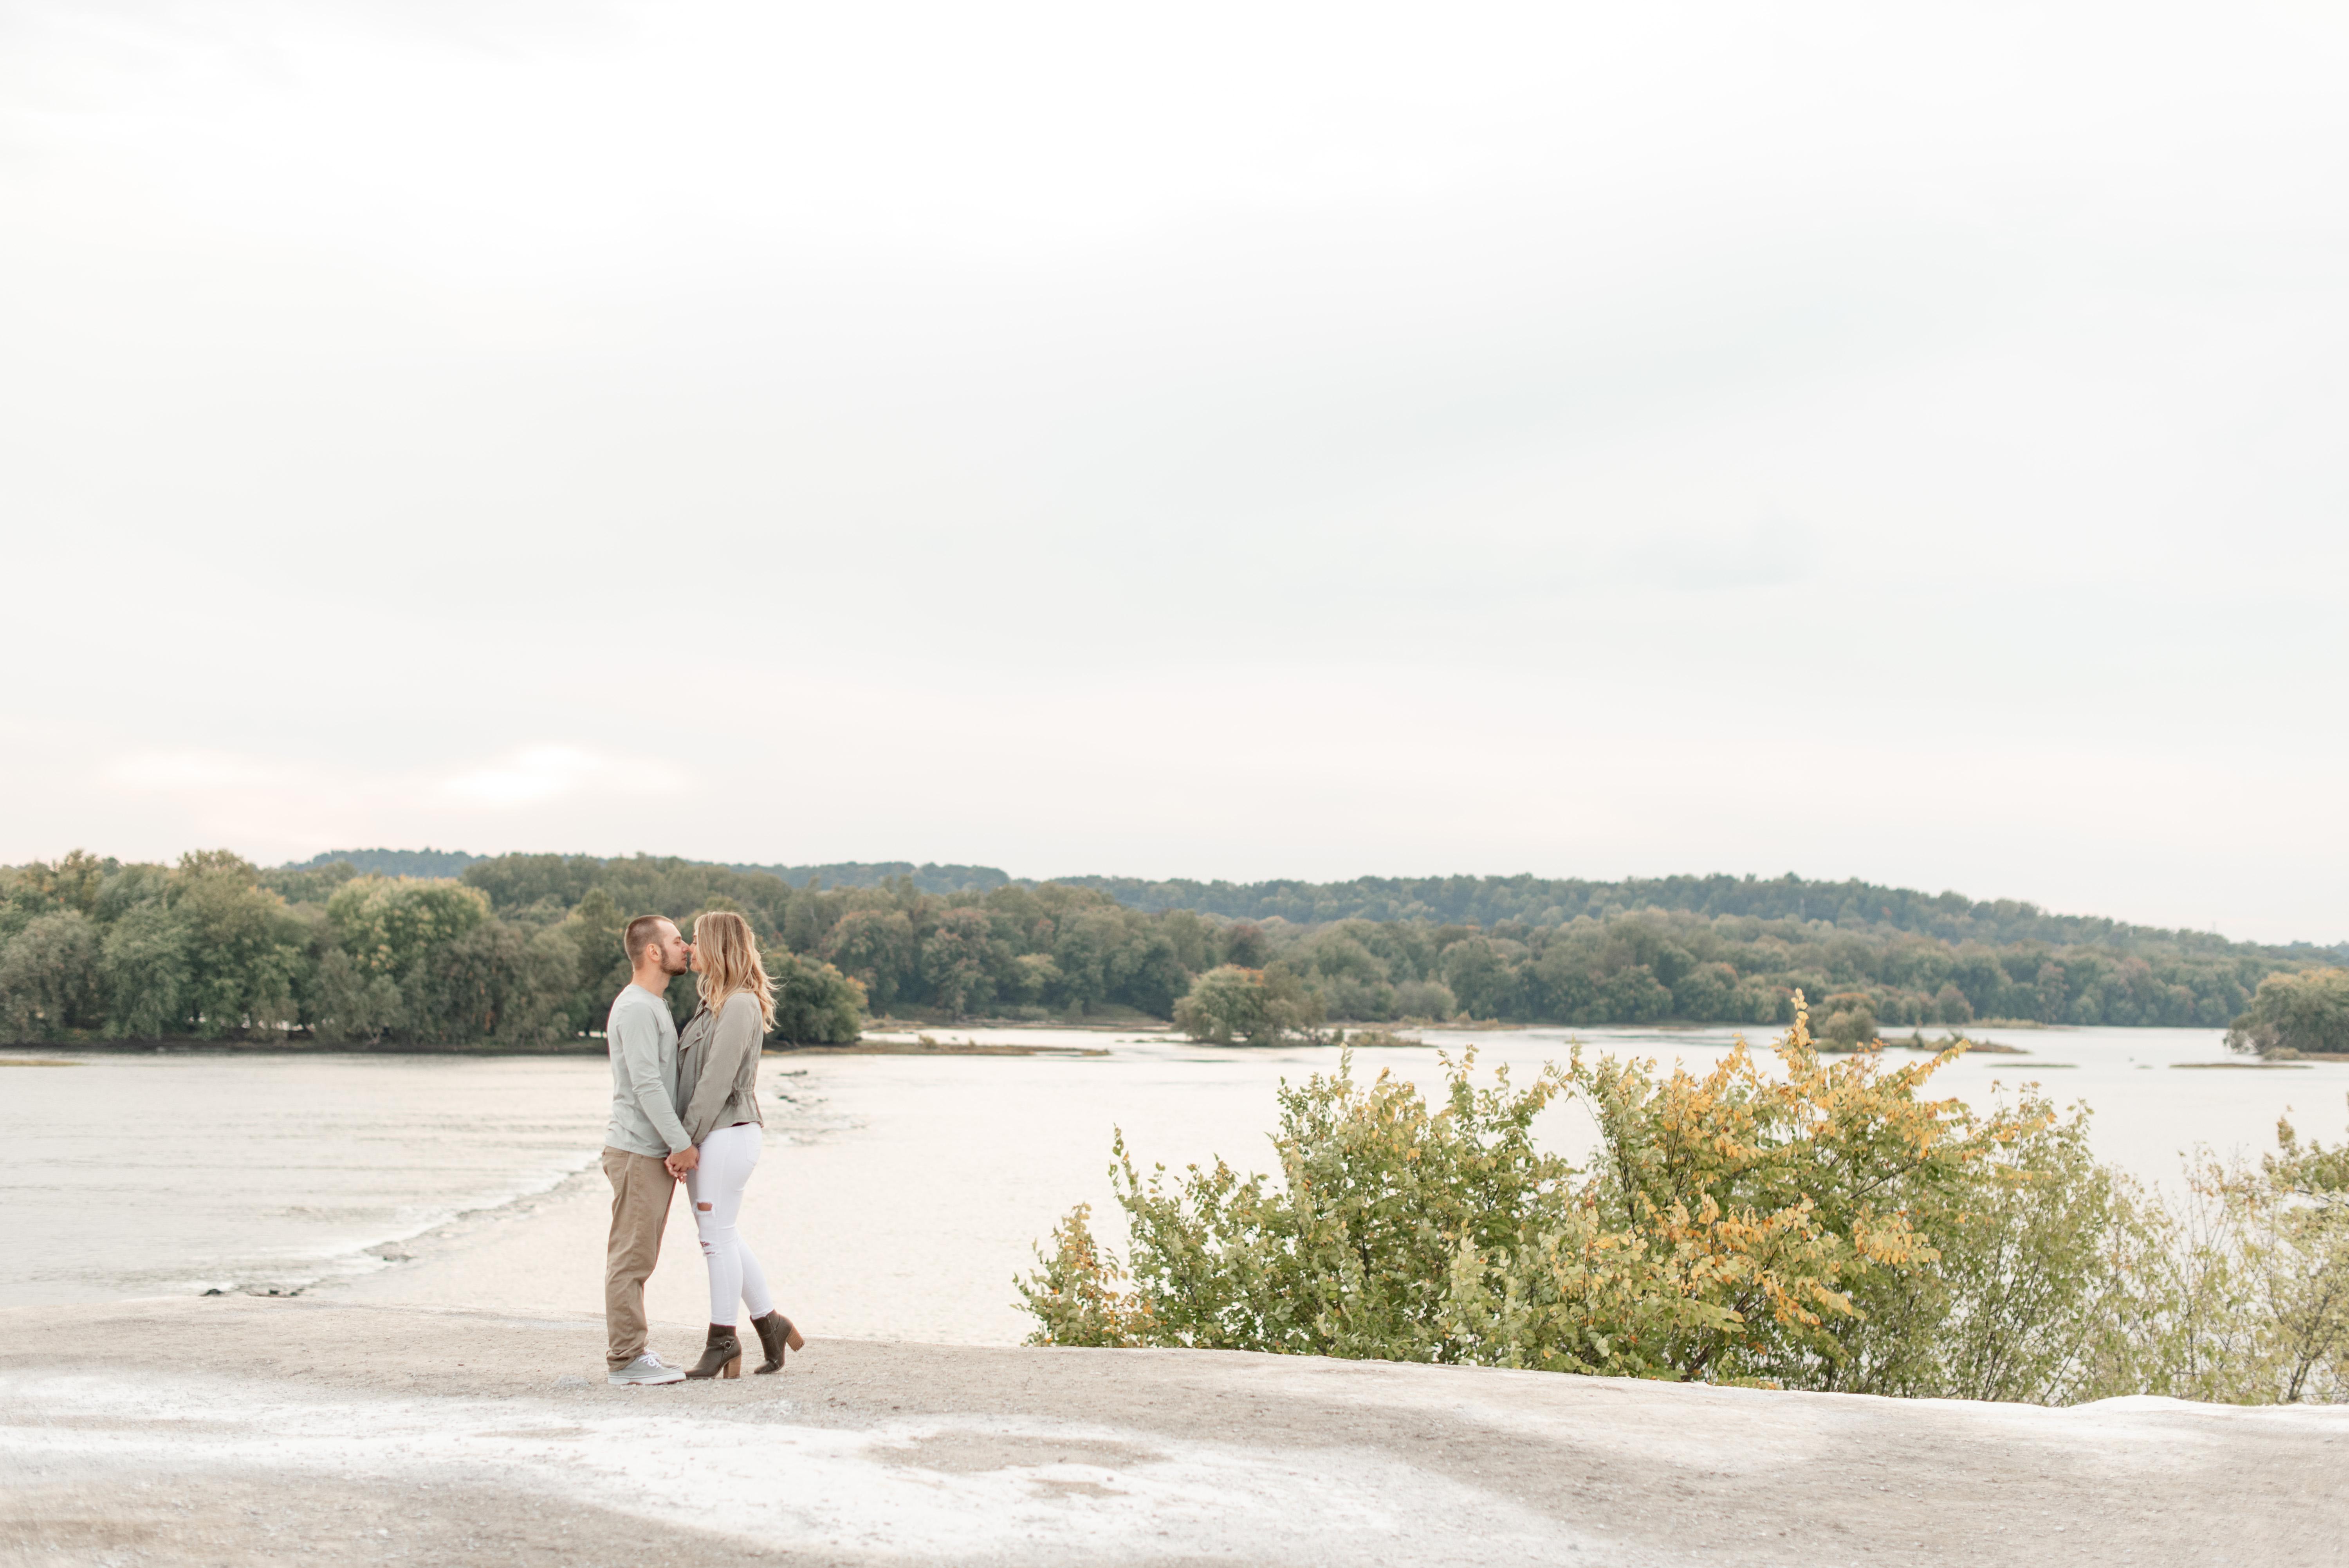 The Wedding Website of Triana Rieger and Manny Hodges